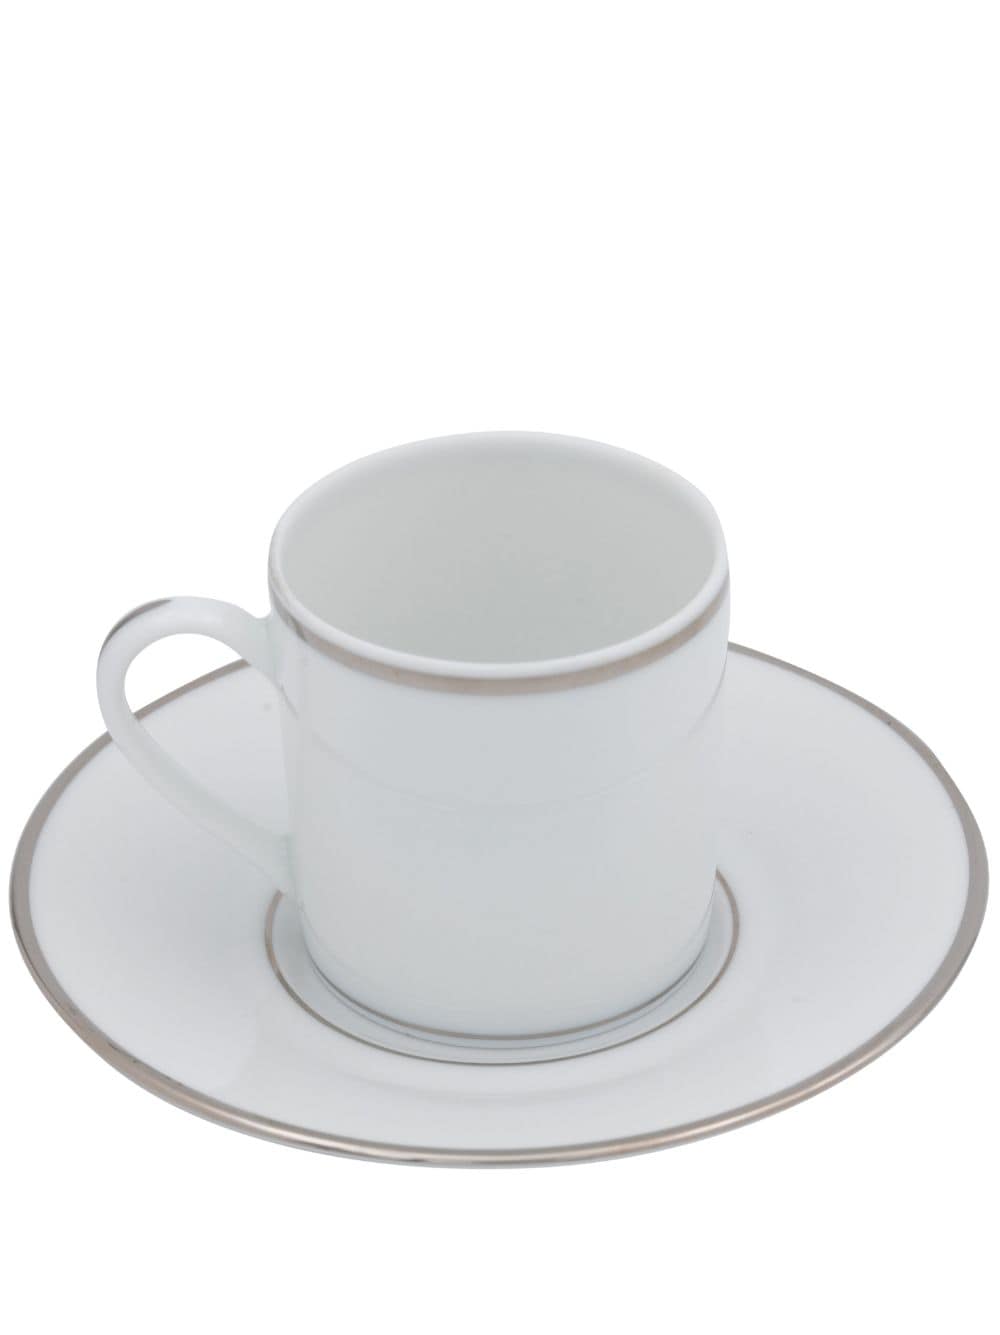 Christofle Gilded Demitasse Cup And Saucer In White